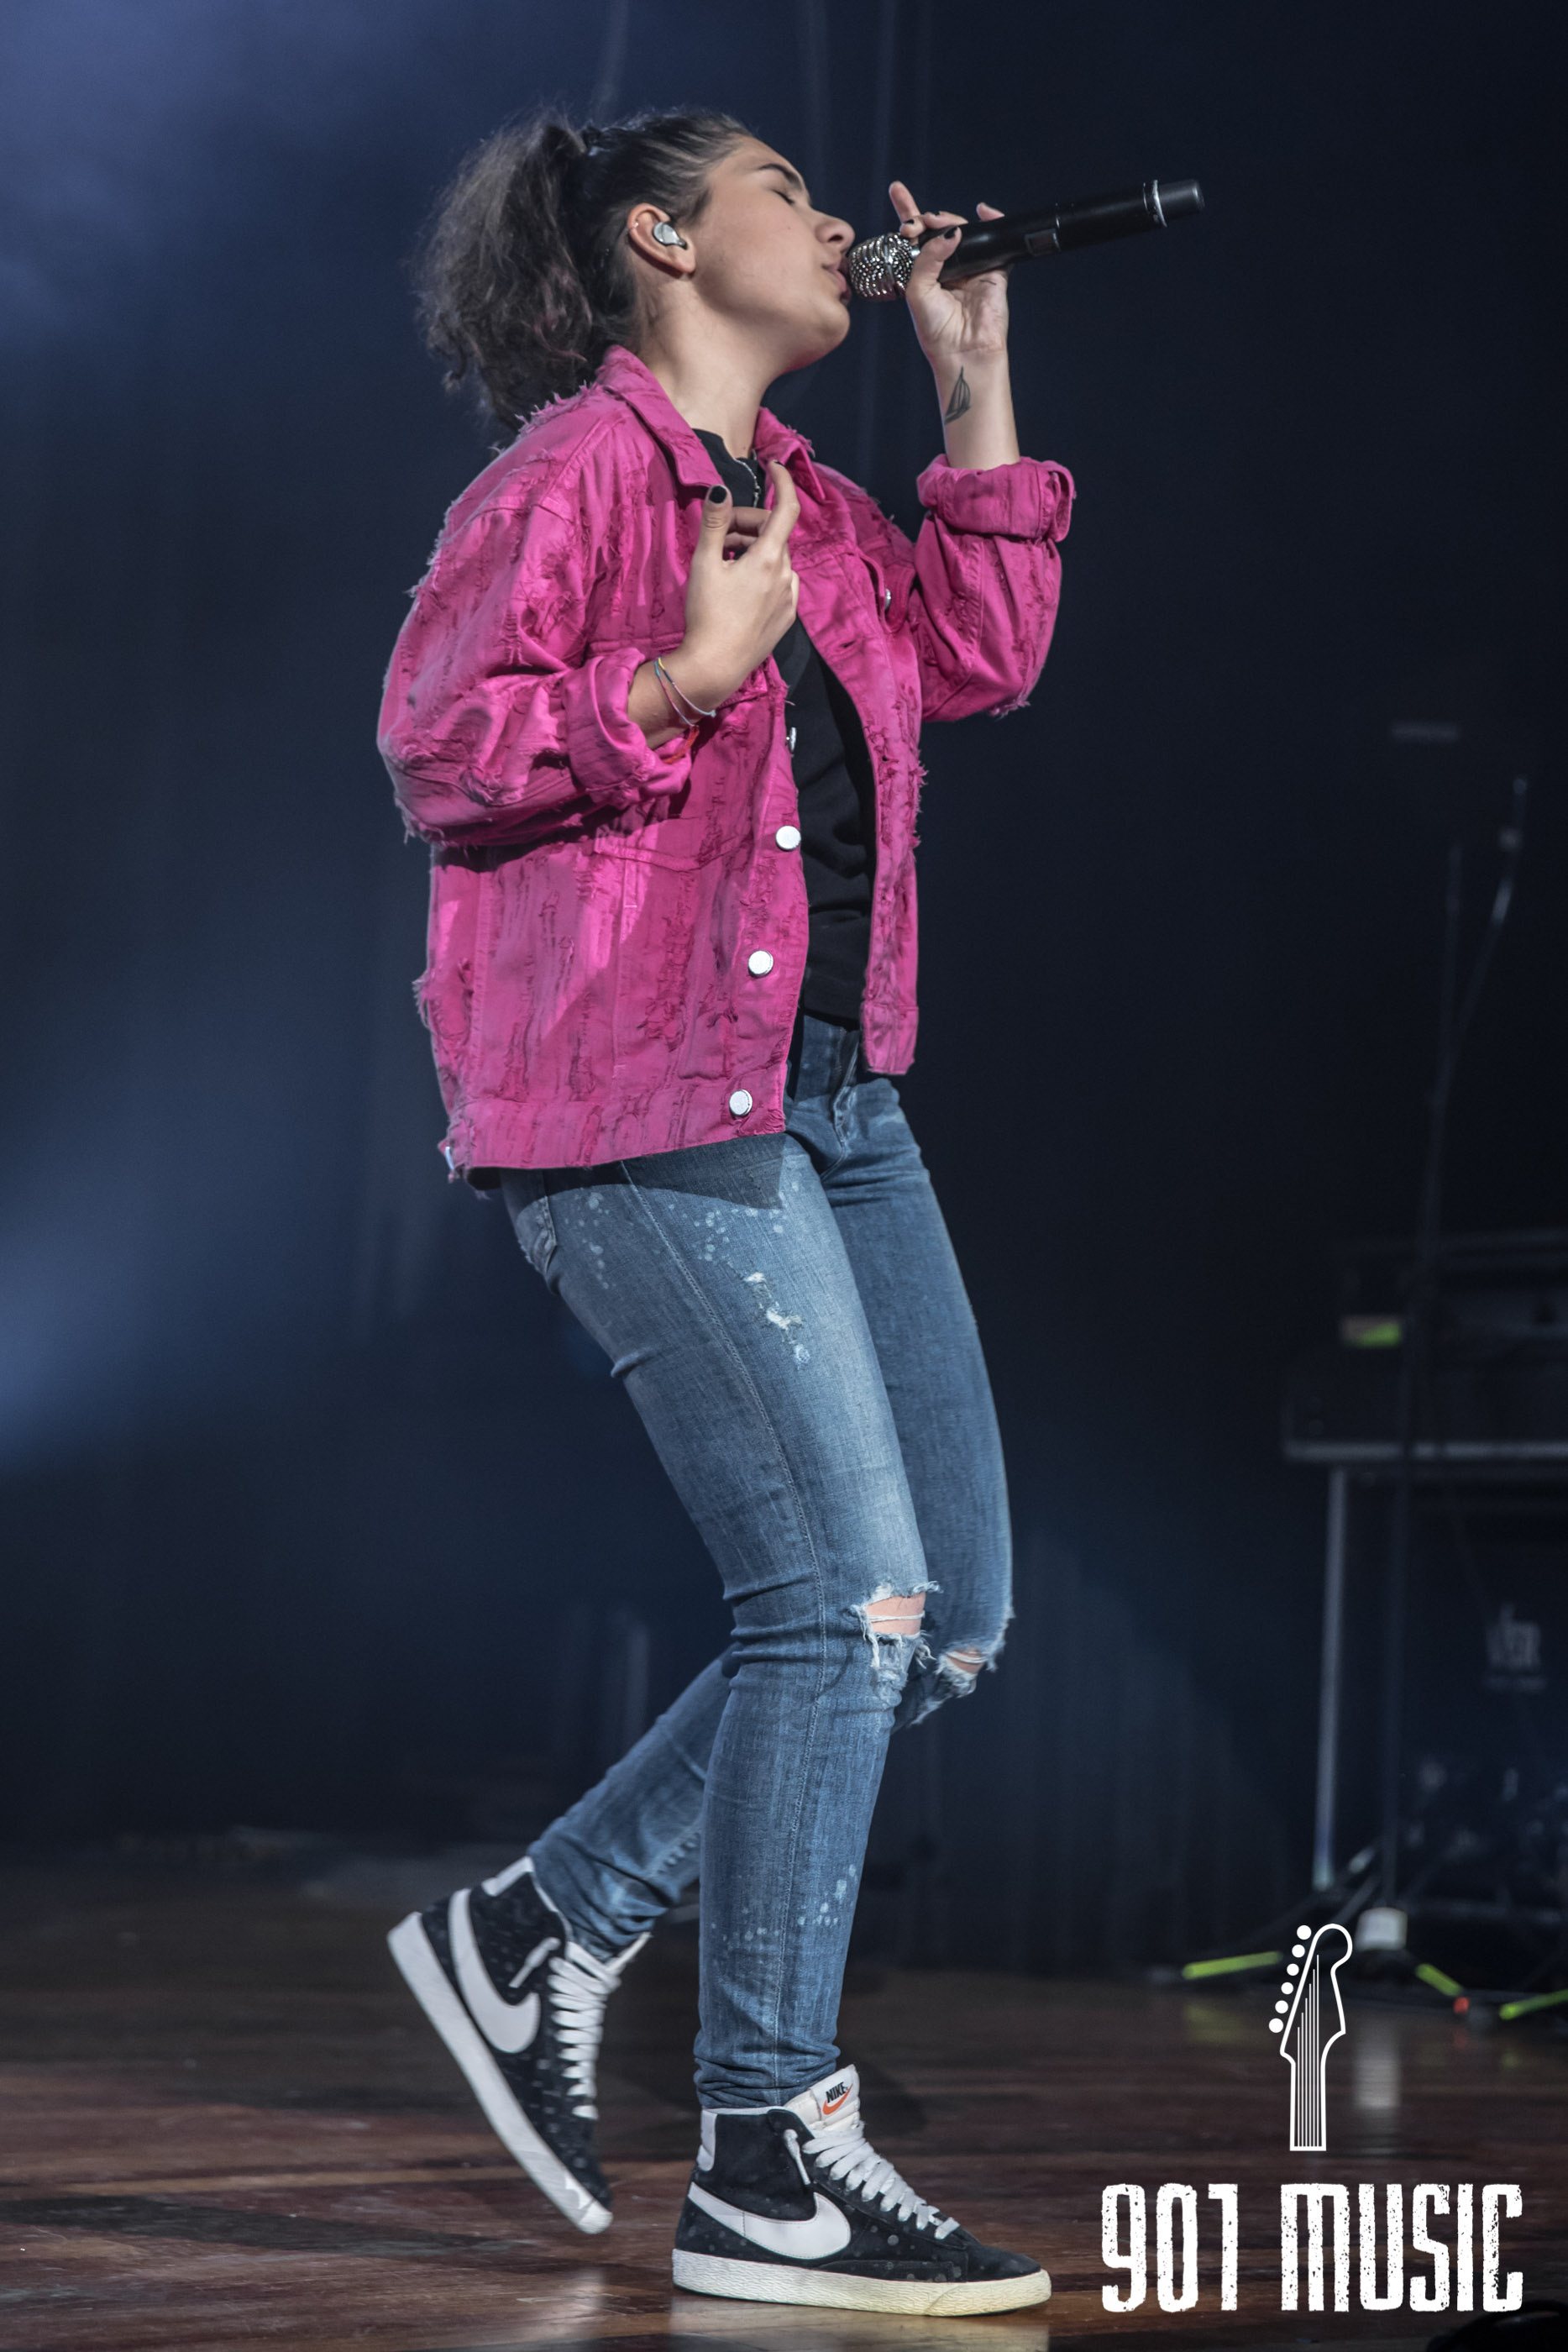 Alessia Cara Wallpaper Iphone posted by Ryan Cunningham 1870x2800